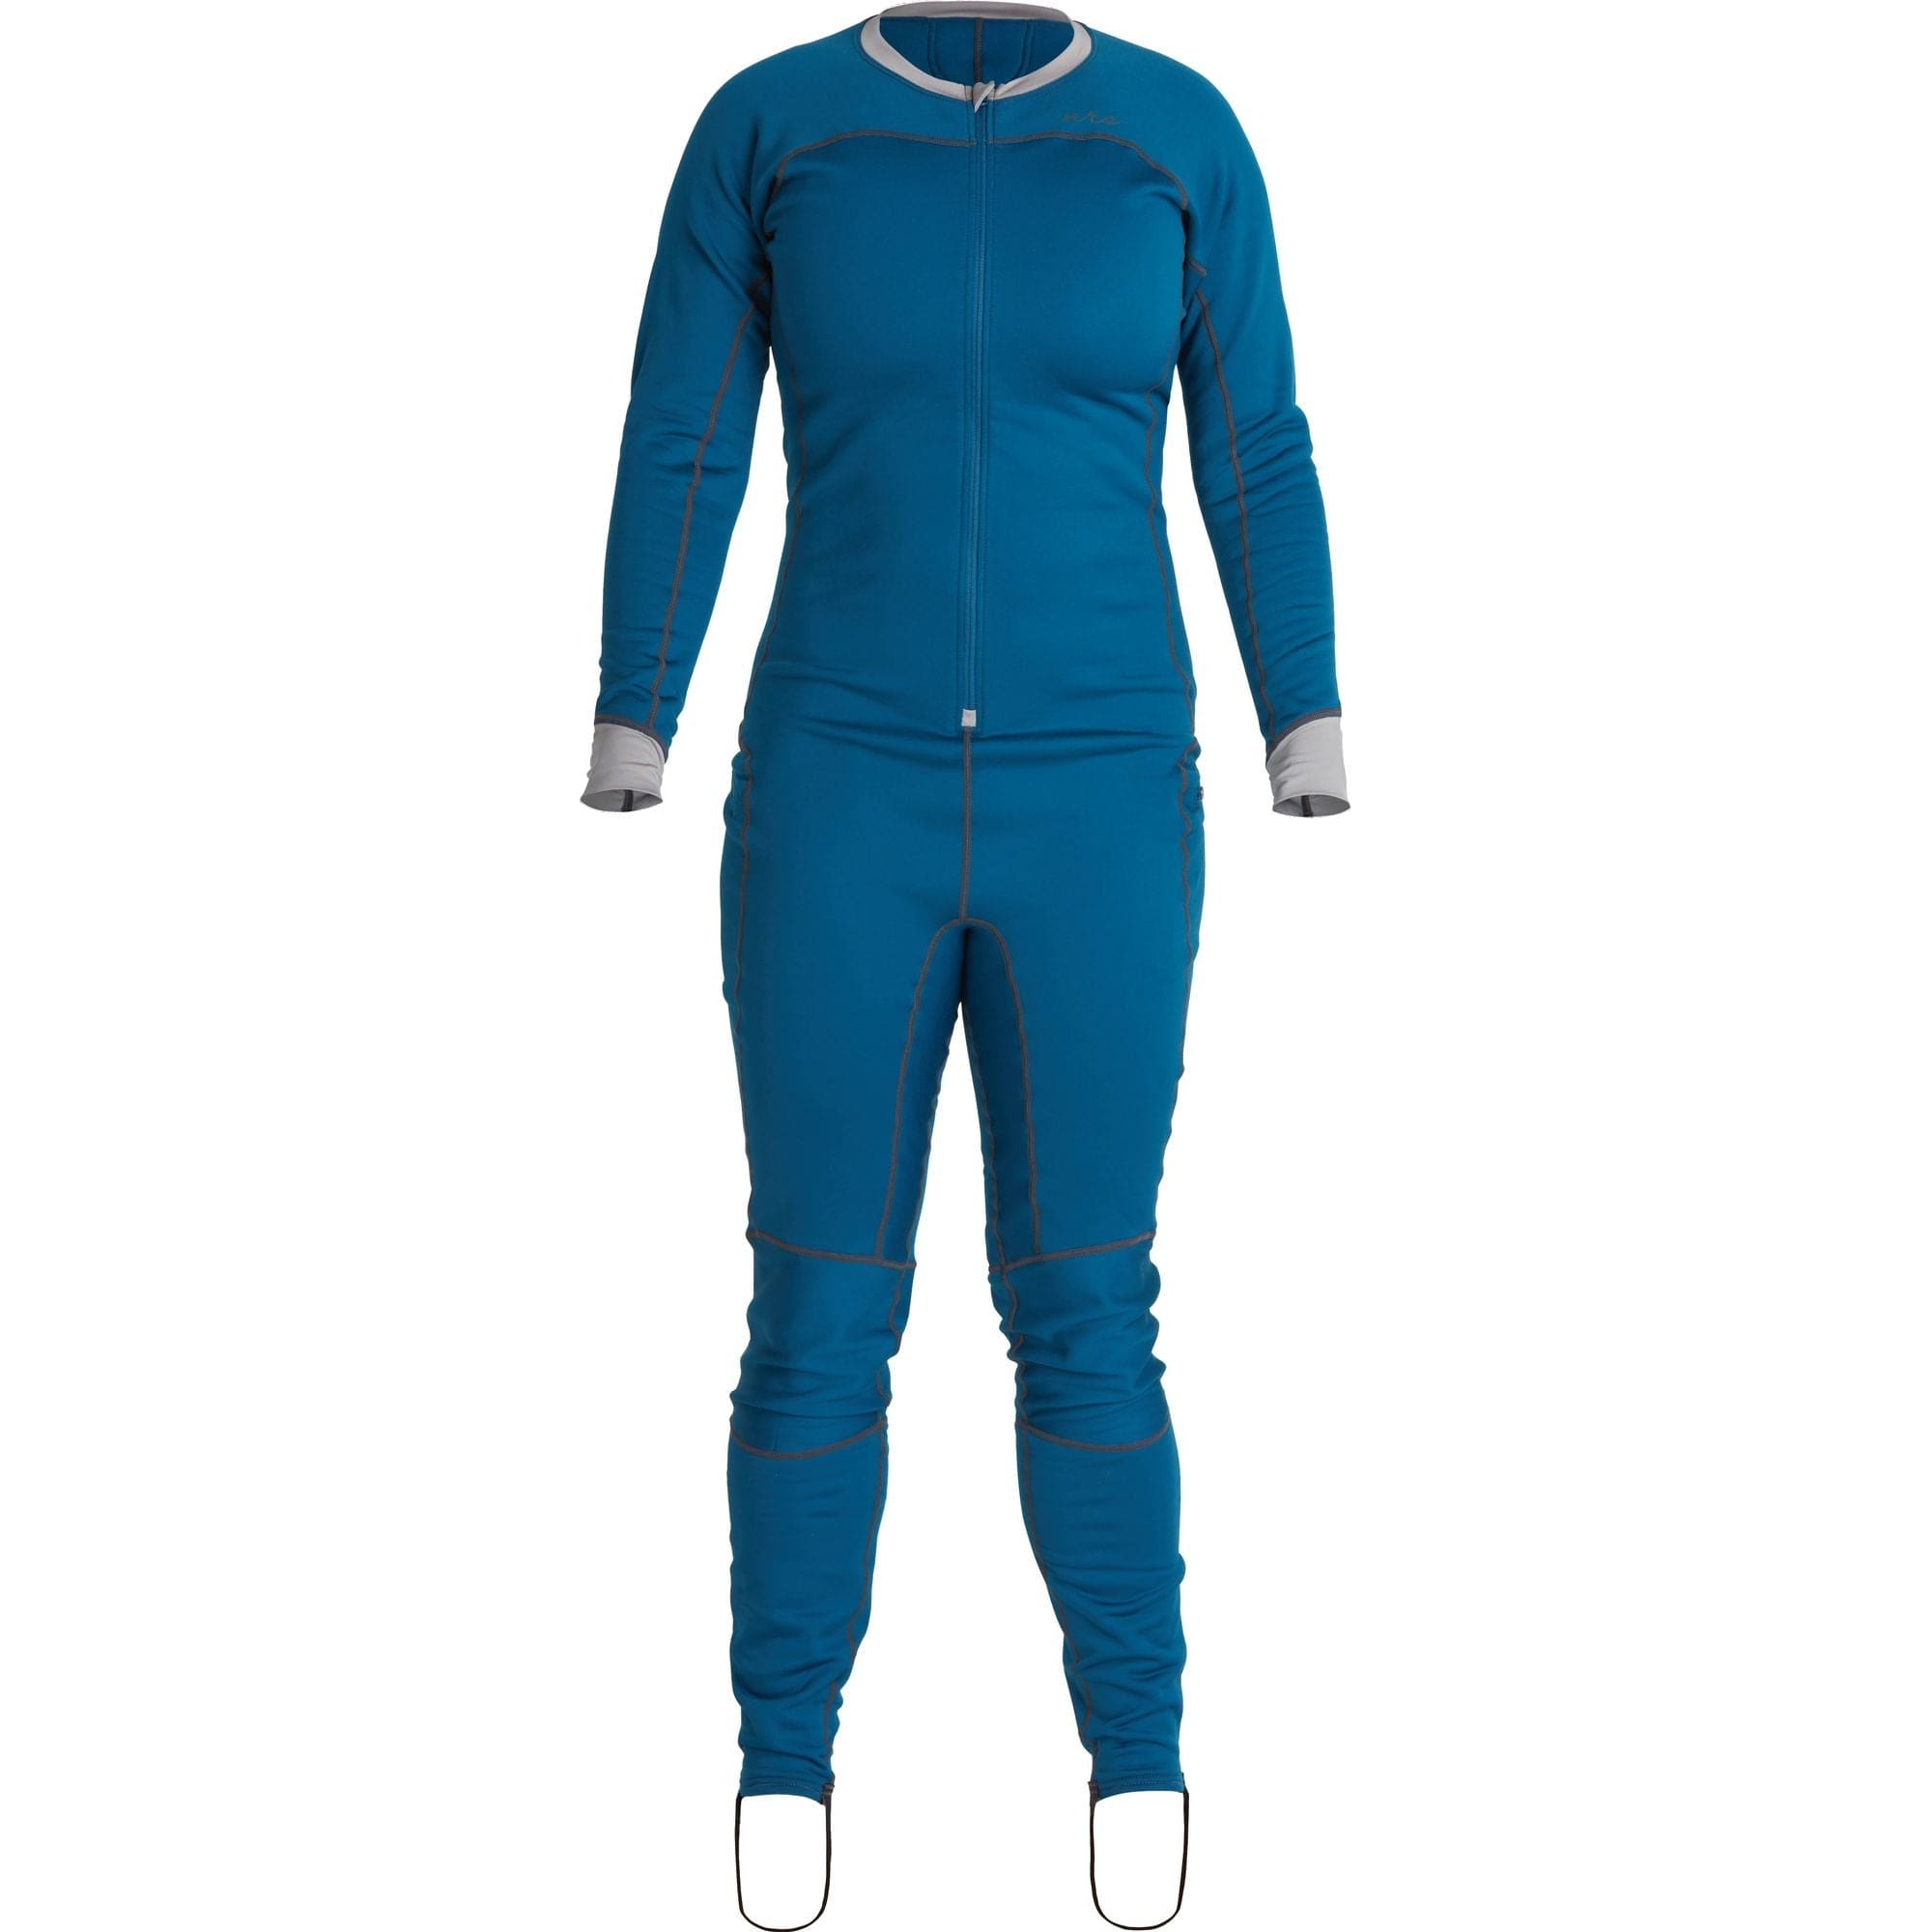 2023 NRS Women's Expedition Weight Union Suit